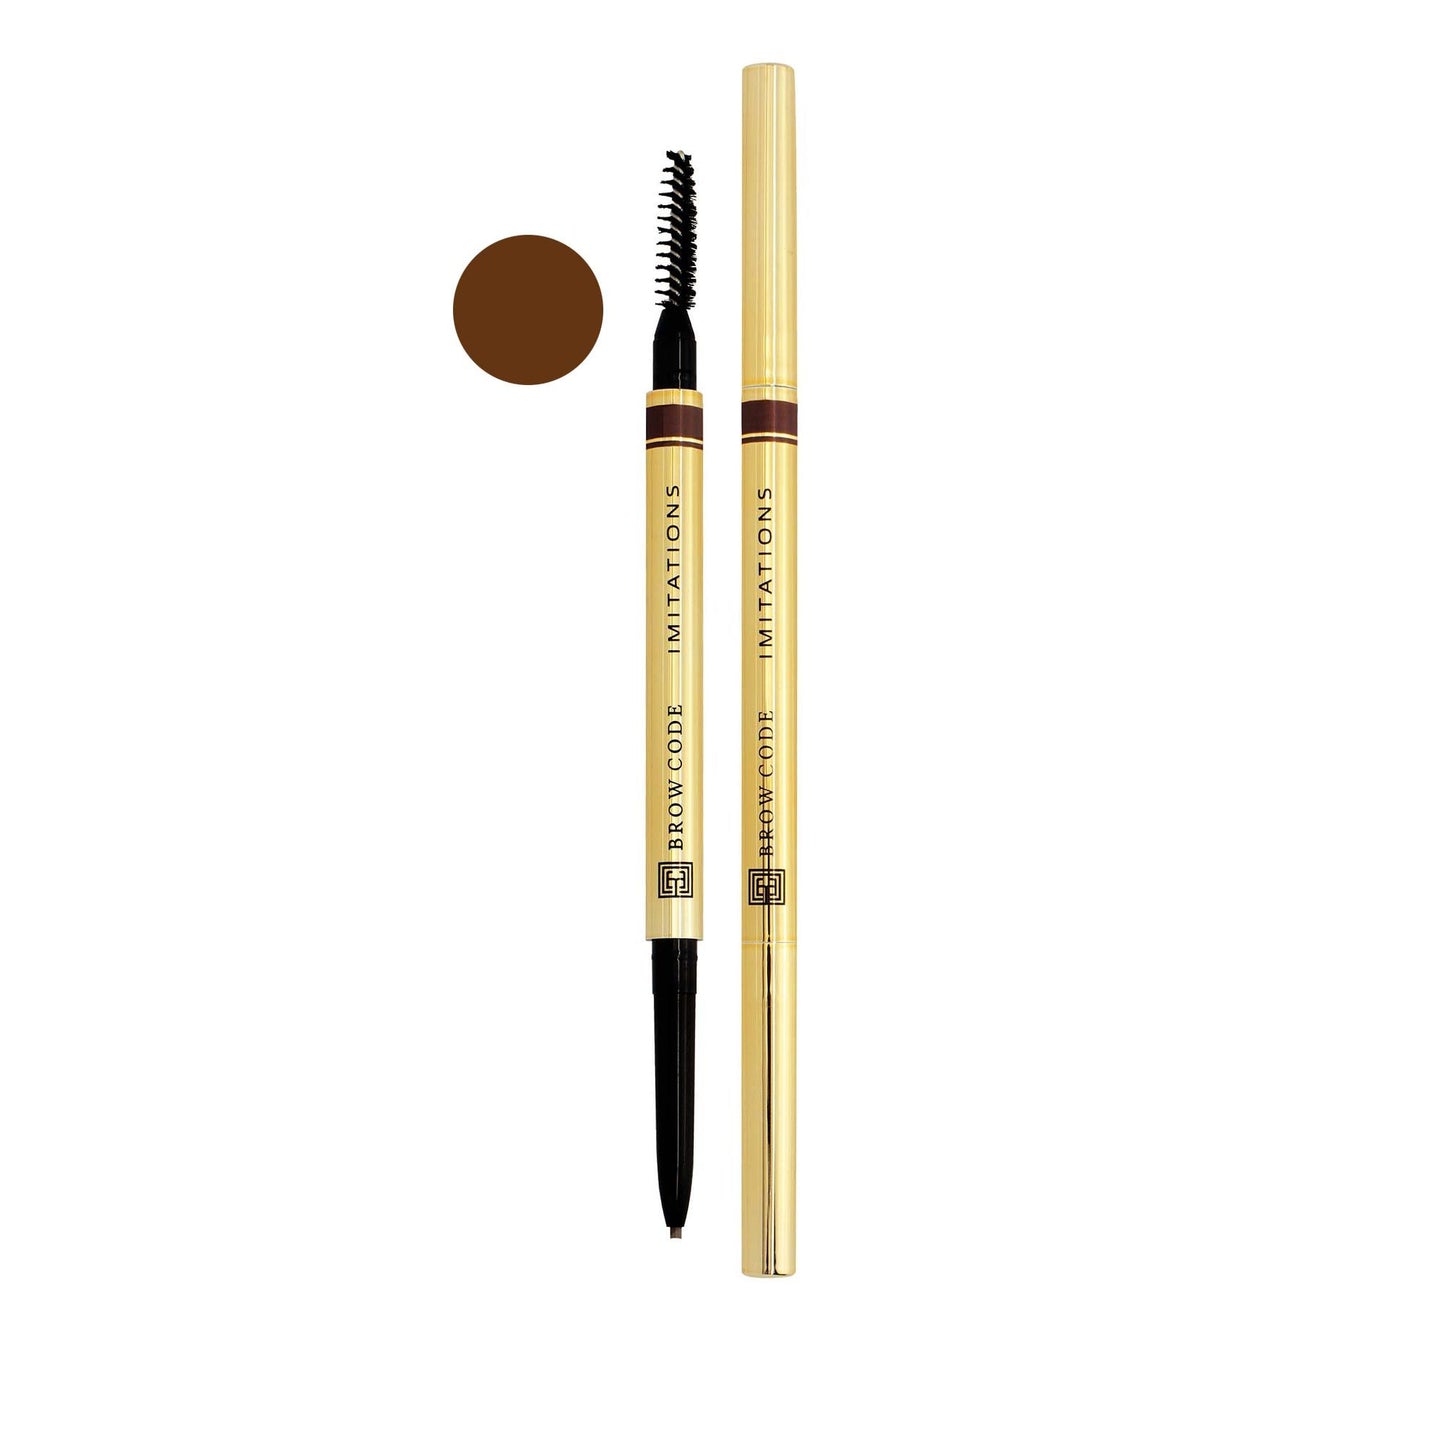 Imitations Micro Brow Pencil Color-Warm Medium Brown - Medium Brown on a whote background